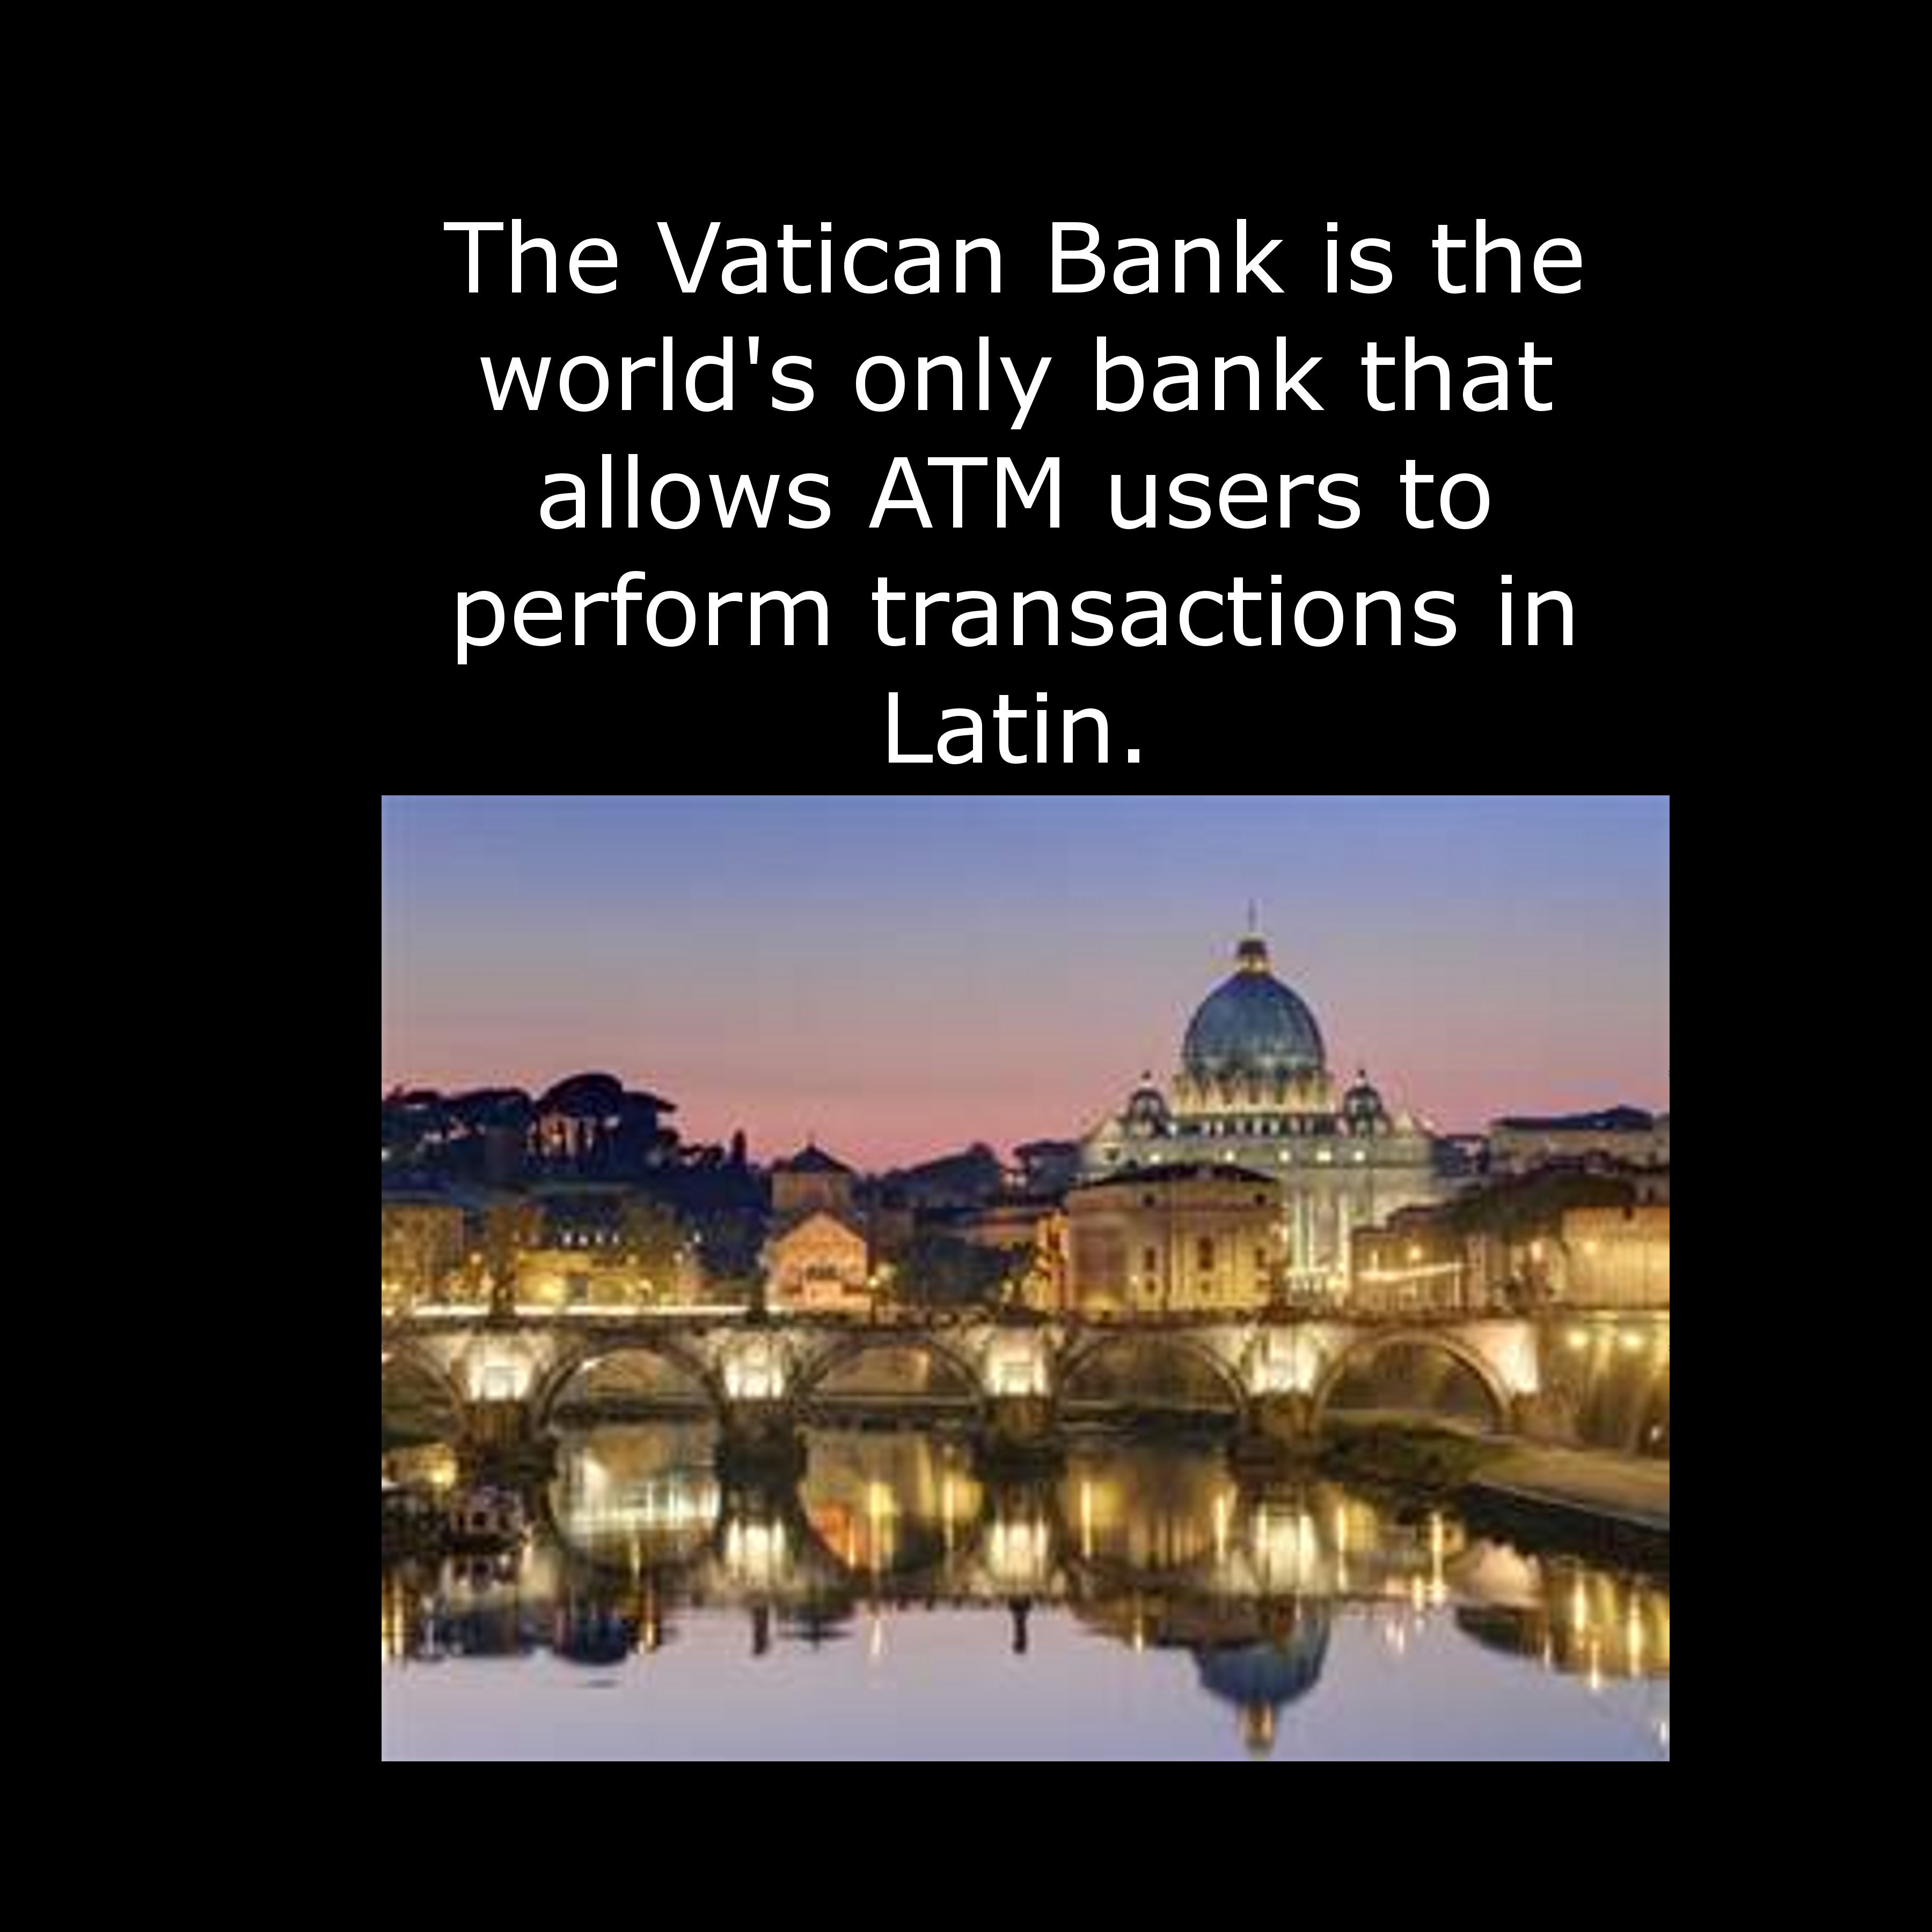 saint peter's square - The Vatican Bank is the world's only bank that allows Atm users to perform transactions in Latin.